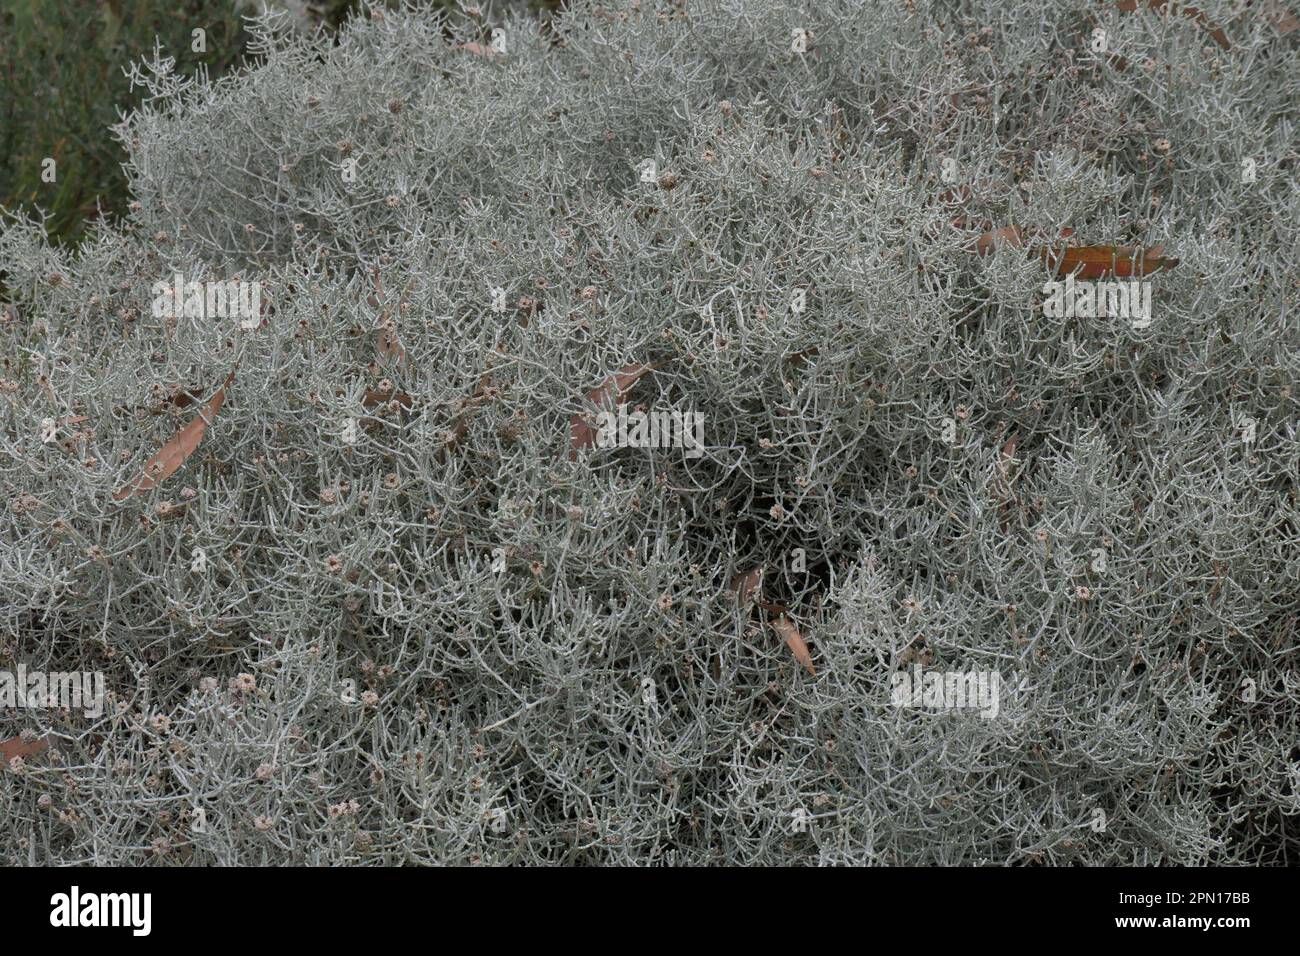 Closeup of the silver leaved garden shrub Leucophyta brownii cushion bush, which is a native plant to Australia. Stock Photo